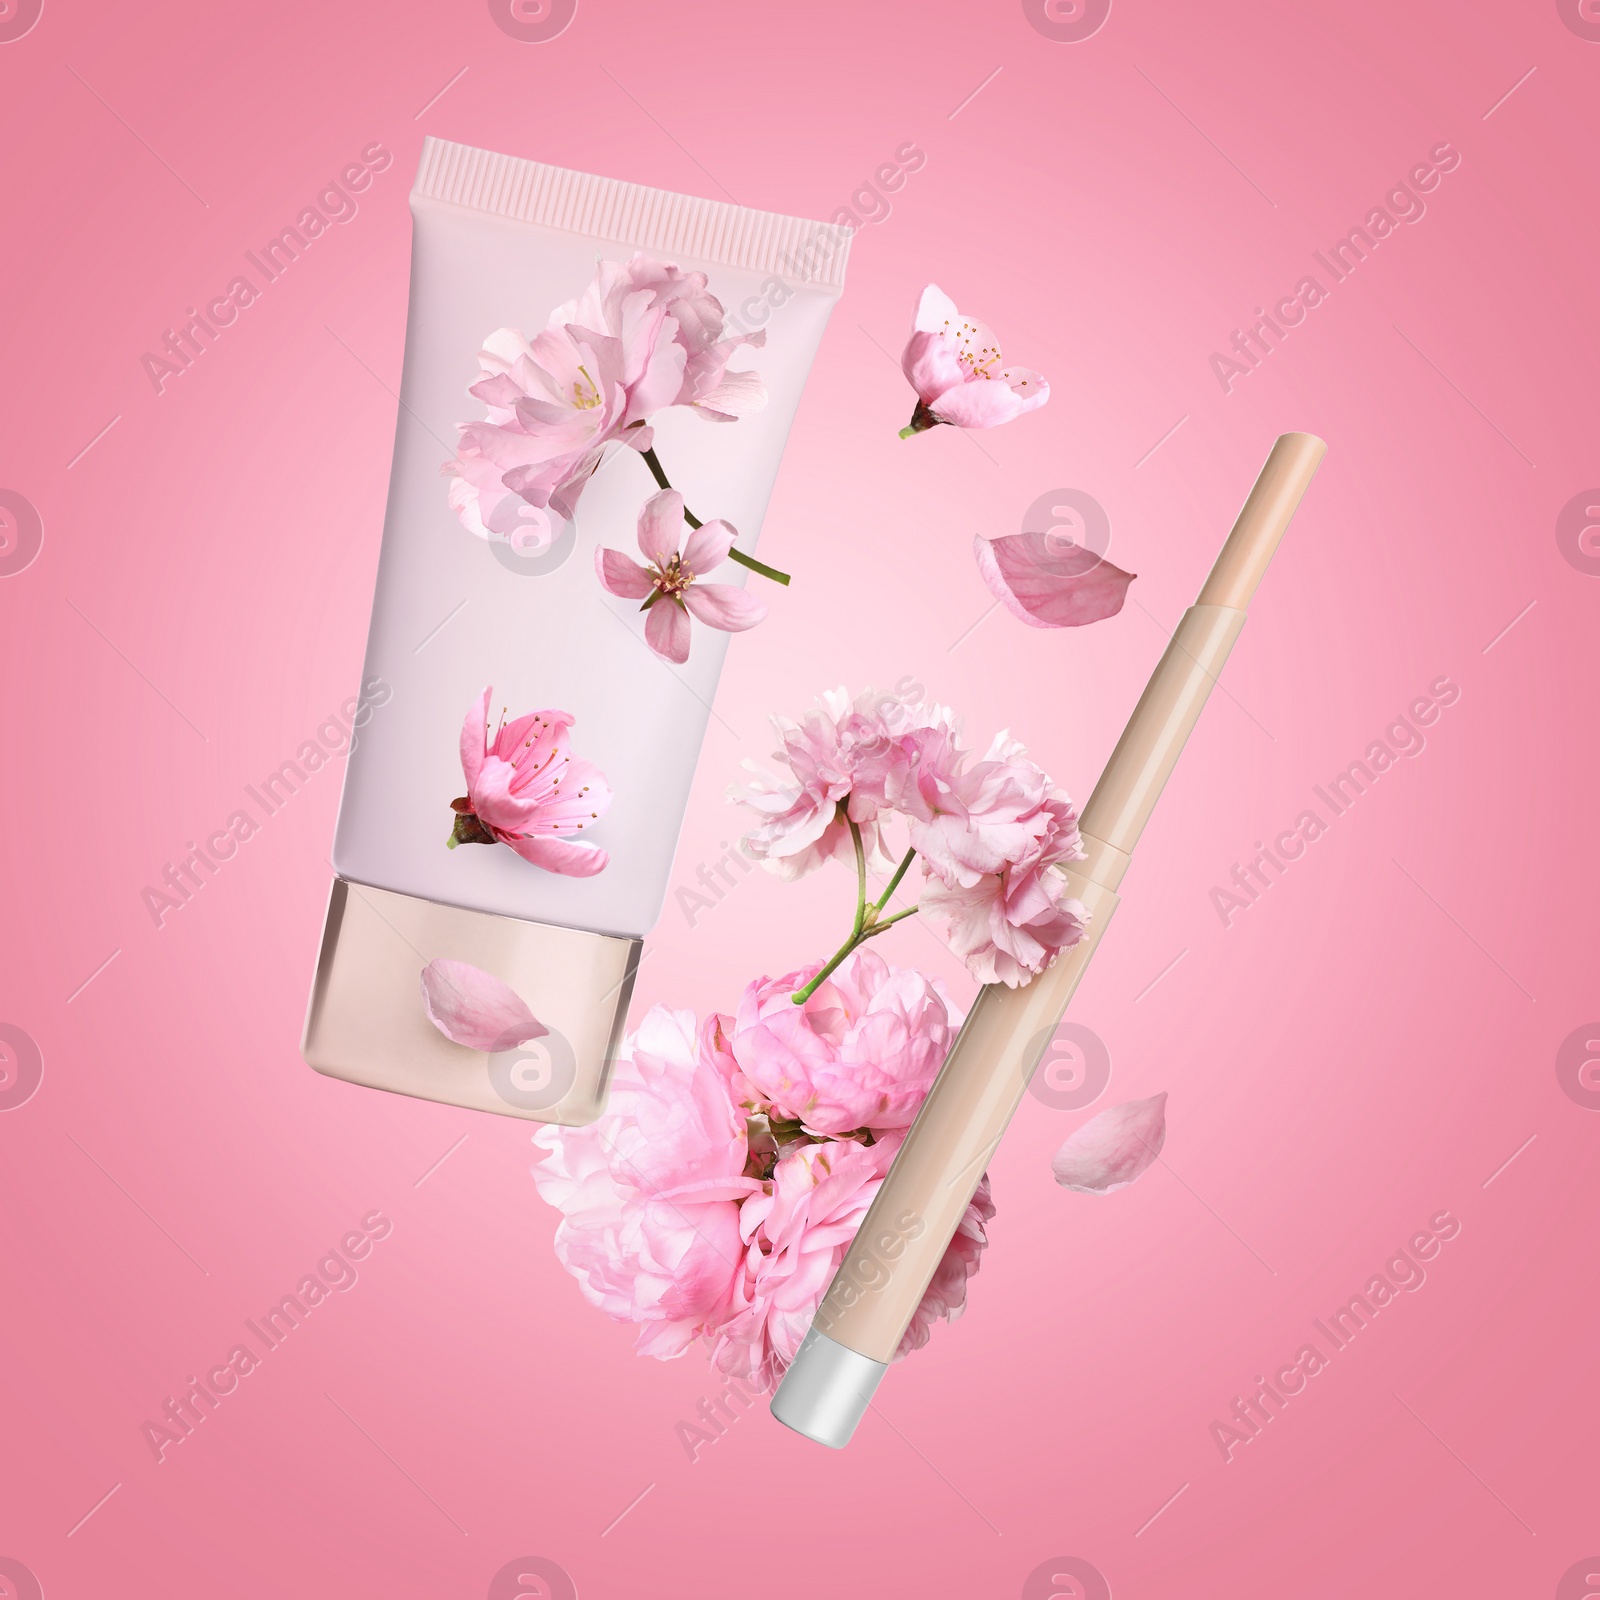 Image of Spring flowers and makeup products in air on pink background